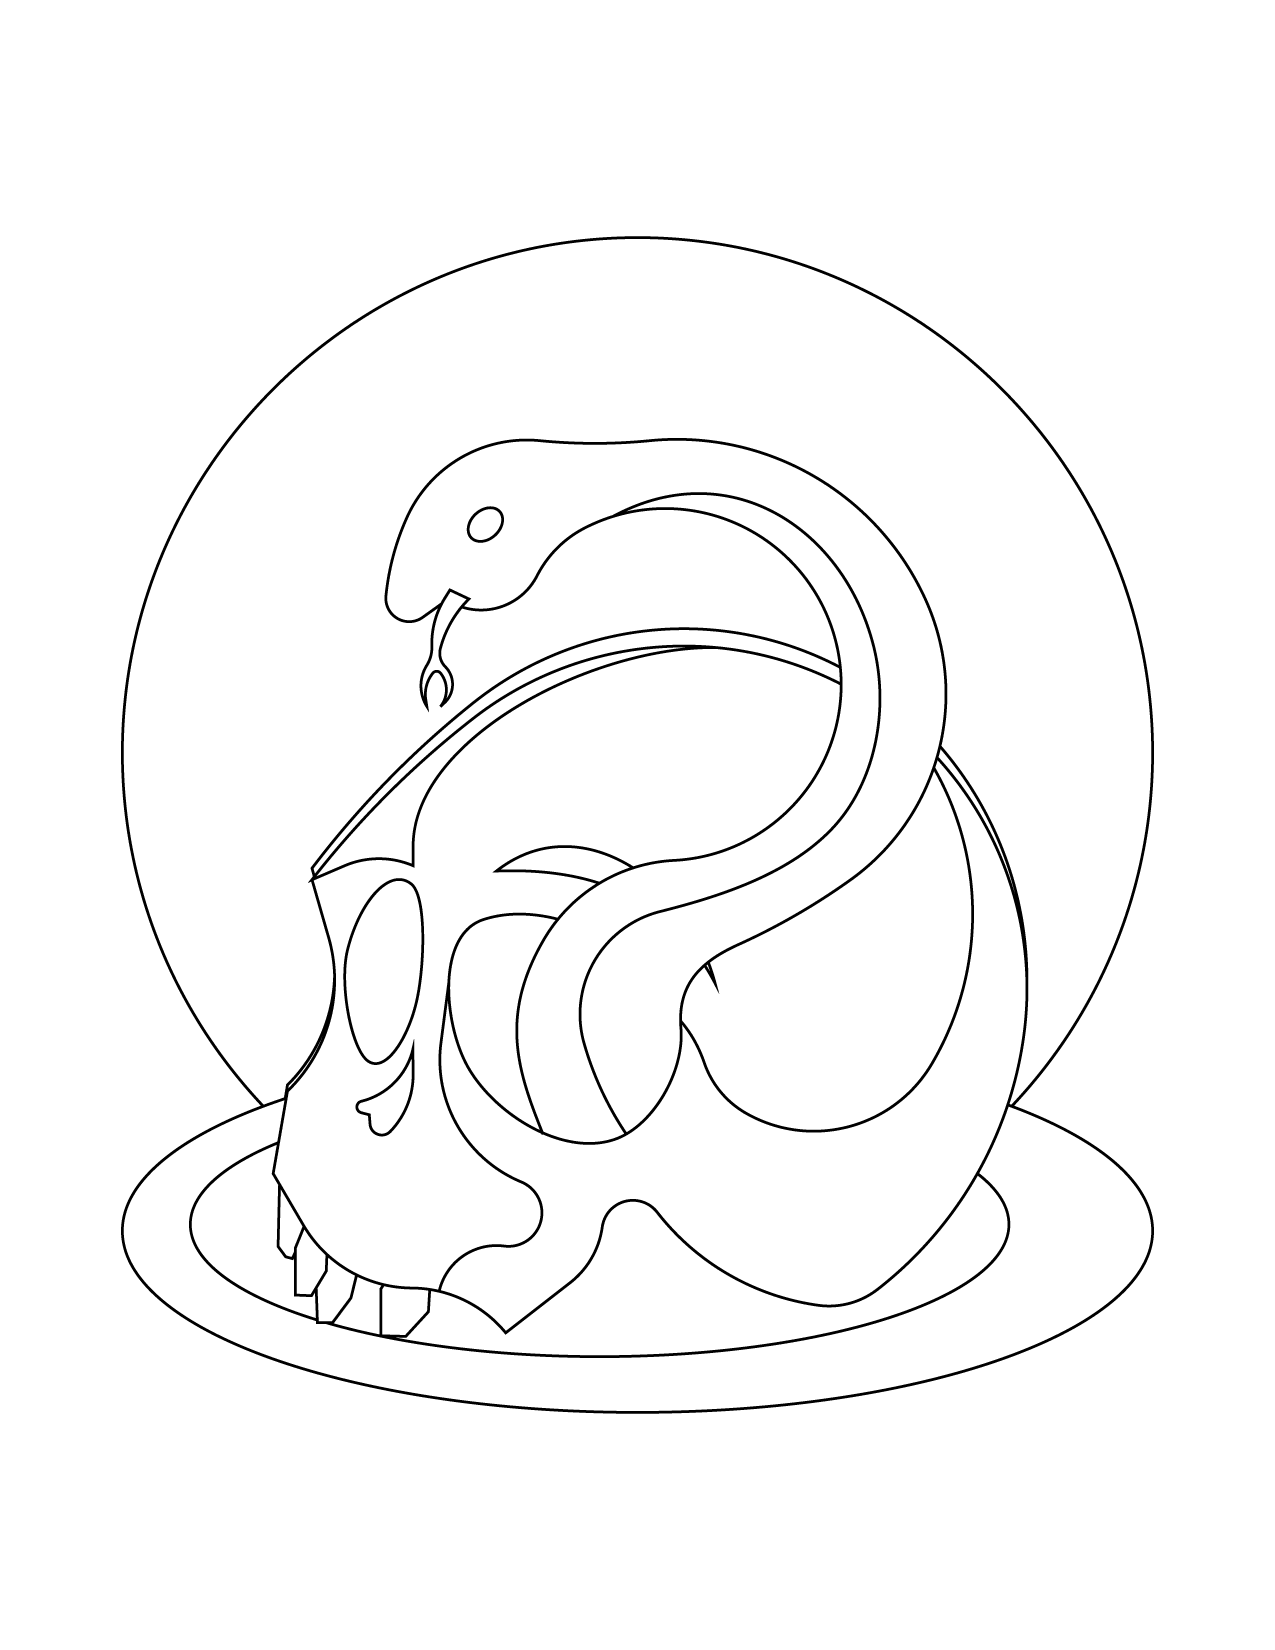 Snake Slithering Through Skull Coloring Page